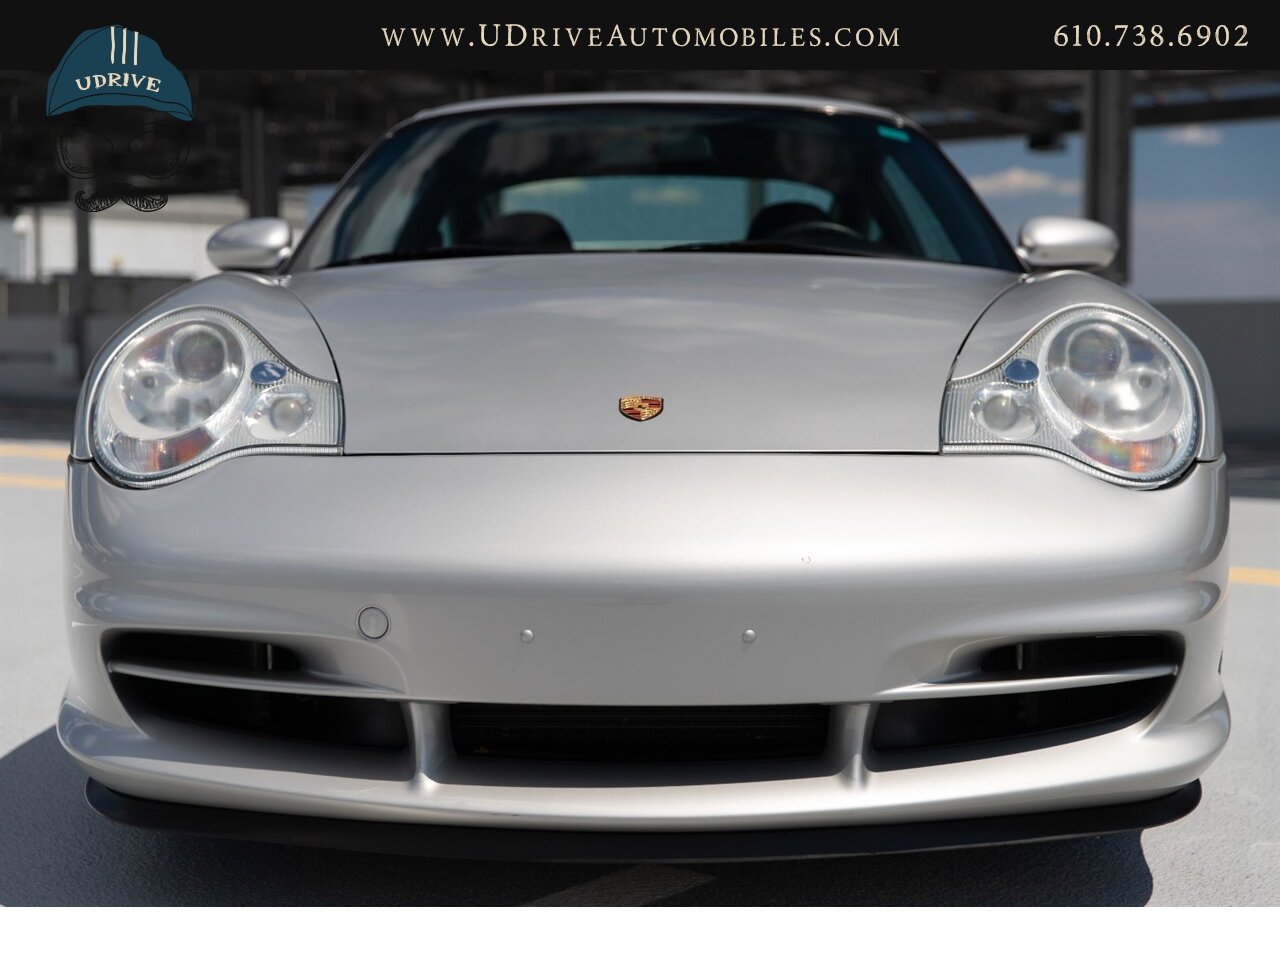 2004 Porsche 911 GT3 18k Miles Sport Seats Painted Hardback Seats  Thicker Steering Wheel Xenon Headlamps - Photo 14 - West Chester, PA 19382